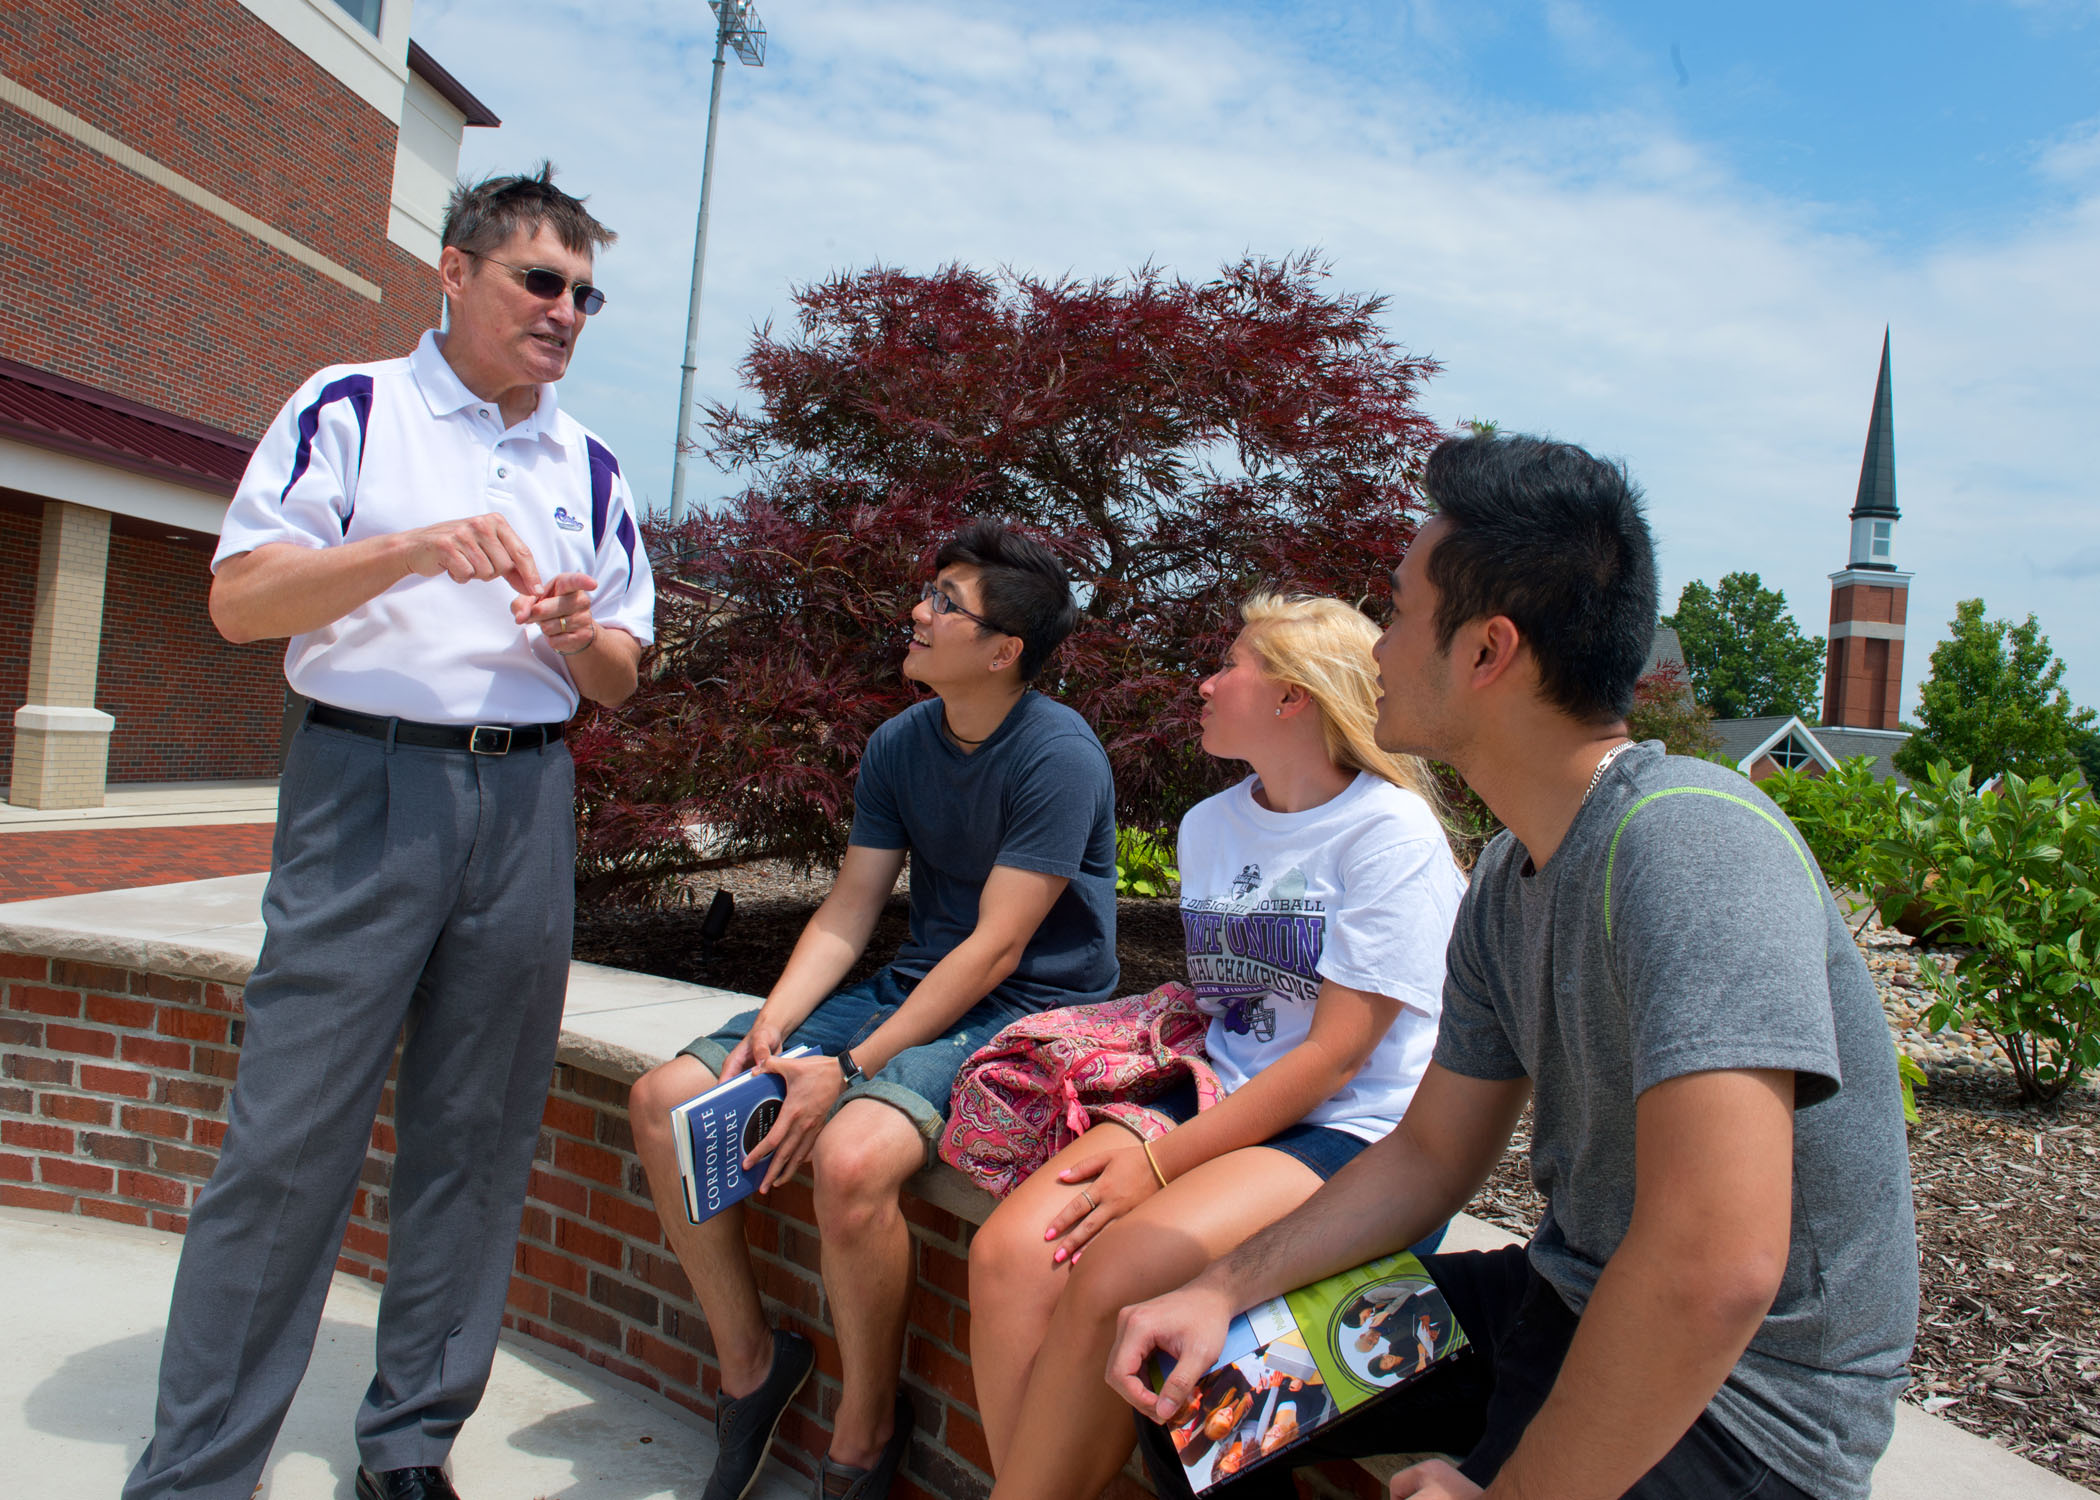 University of Mount Union students and professor gathered on campus 